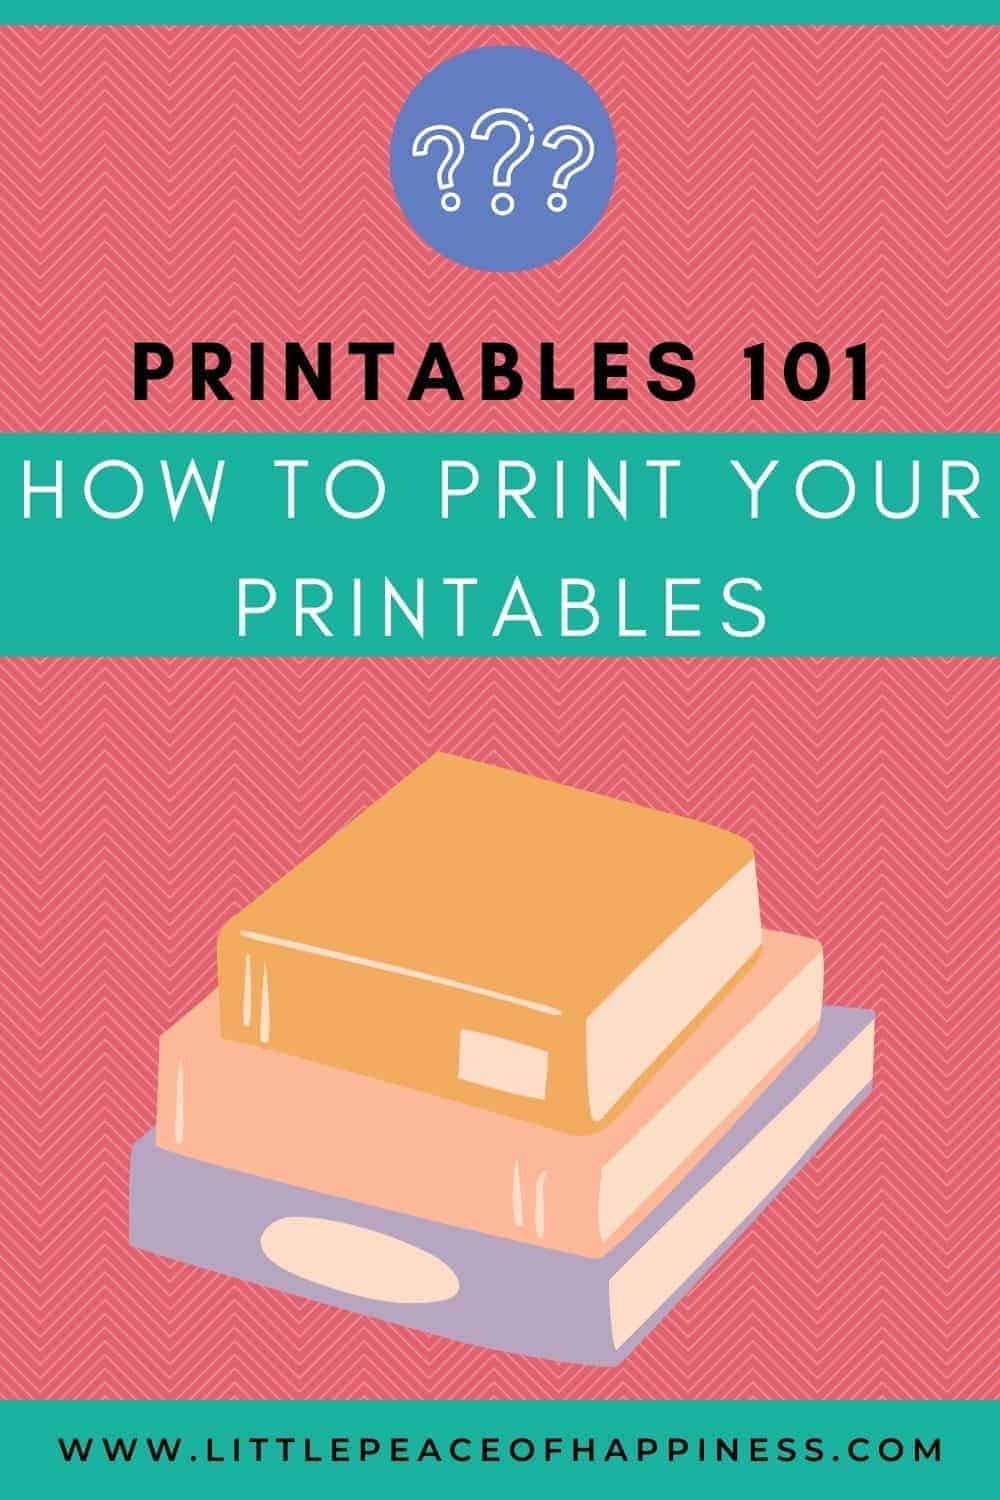 printables-101-how-to-print-your-printables-little-peace-of-happiness